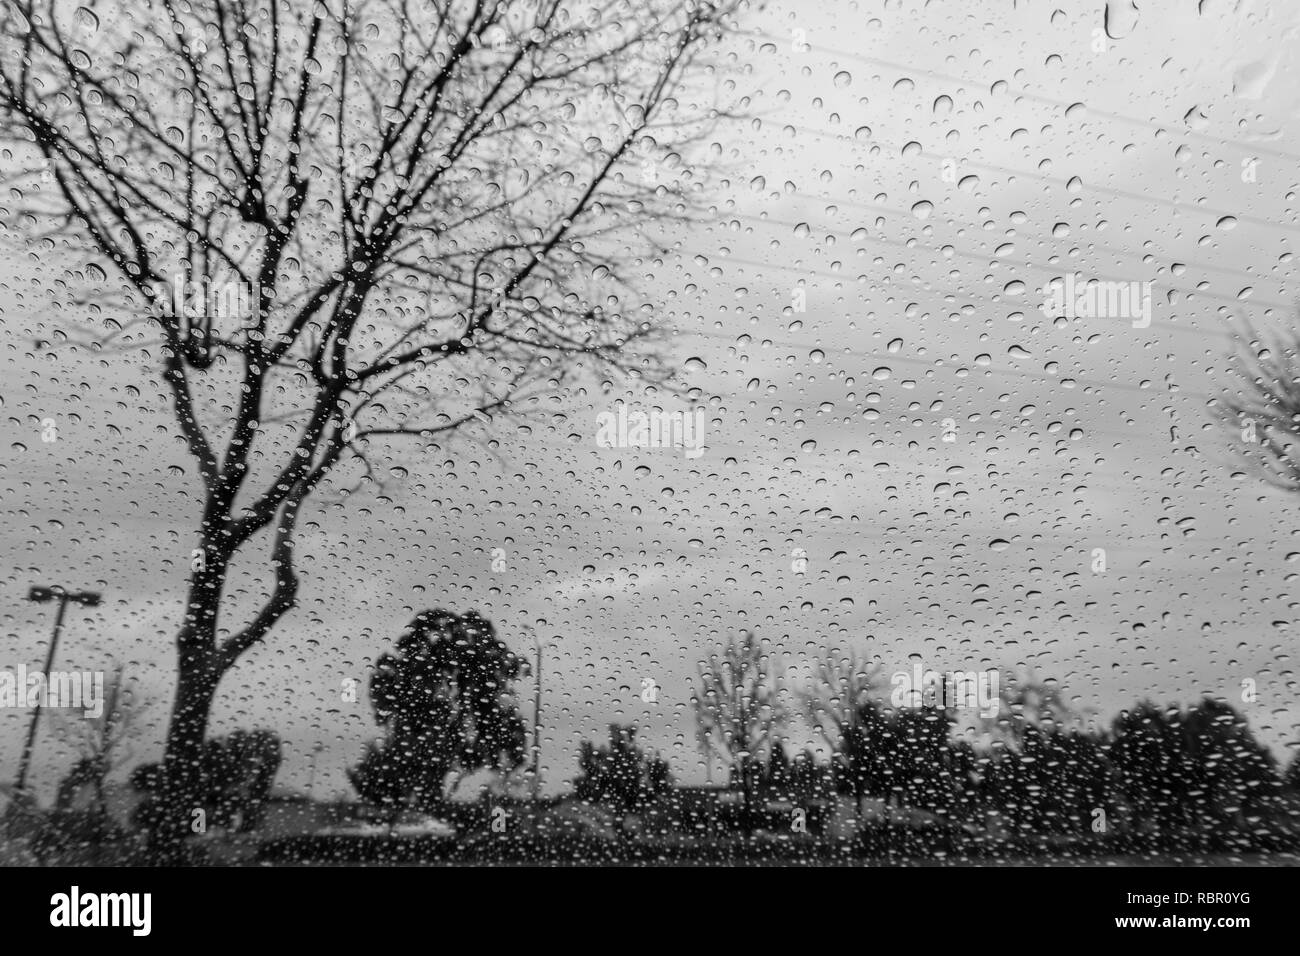 Drops of rain on the window; blurred trees in the background; shallow depth of field; black and white Stock Photo